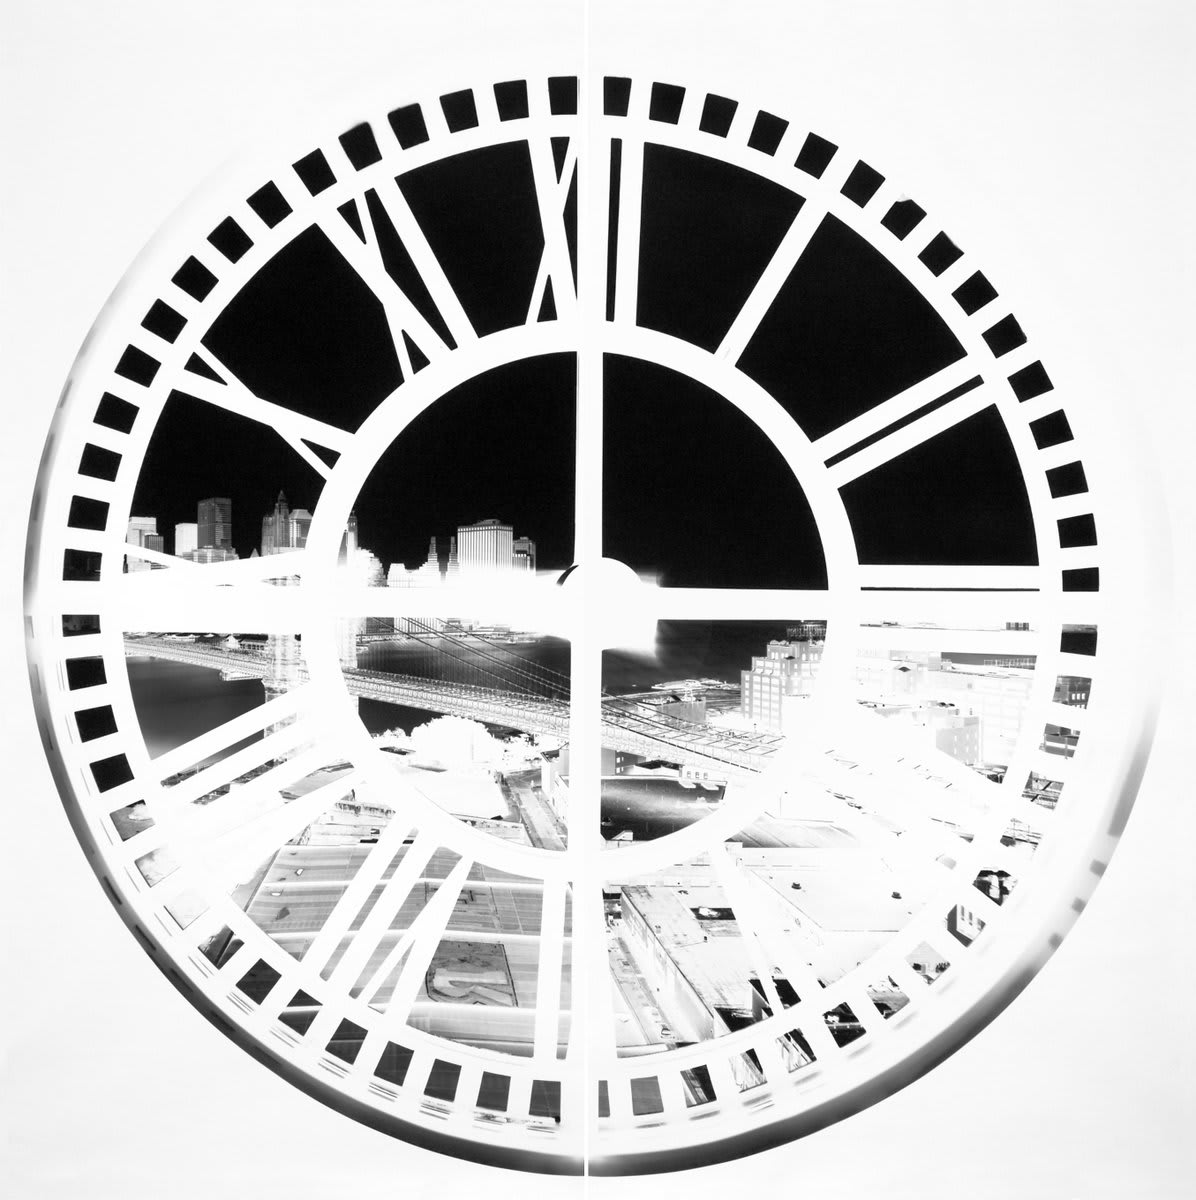 Photographs Take Time recently opened at the @ChryslerMuseum in Norfolk, Virginia, showing works by many artists from the museum's holdings. https://t.co/2ZFq0AKRHY 📷Vera Lutter, Clock Tower, Brooklyn, XLIV: June 22-23, 2009. Courtesy The Chrysler Museum of Art.